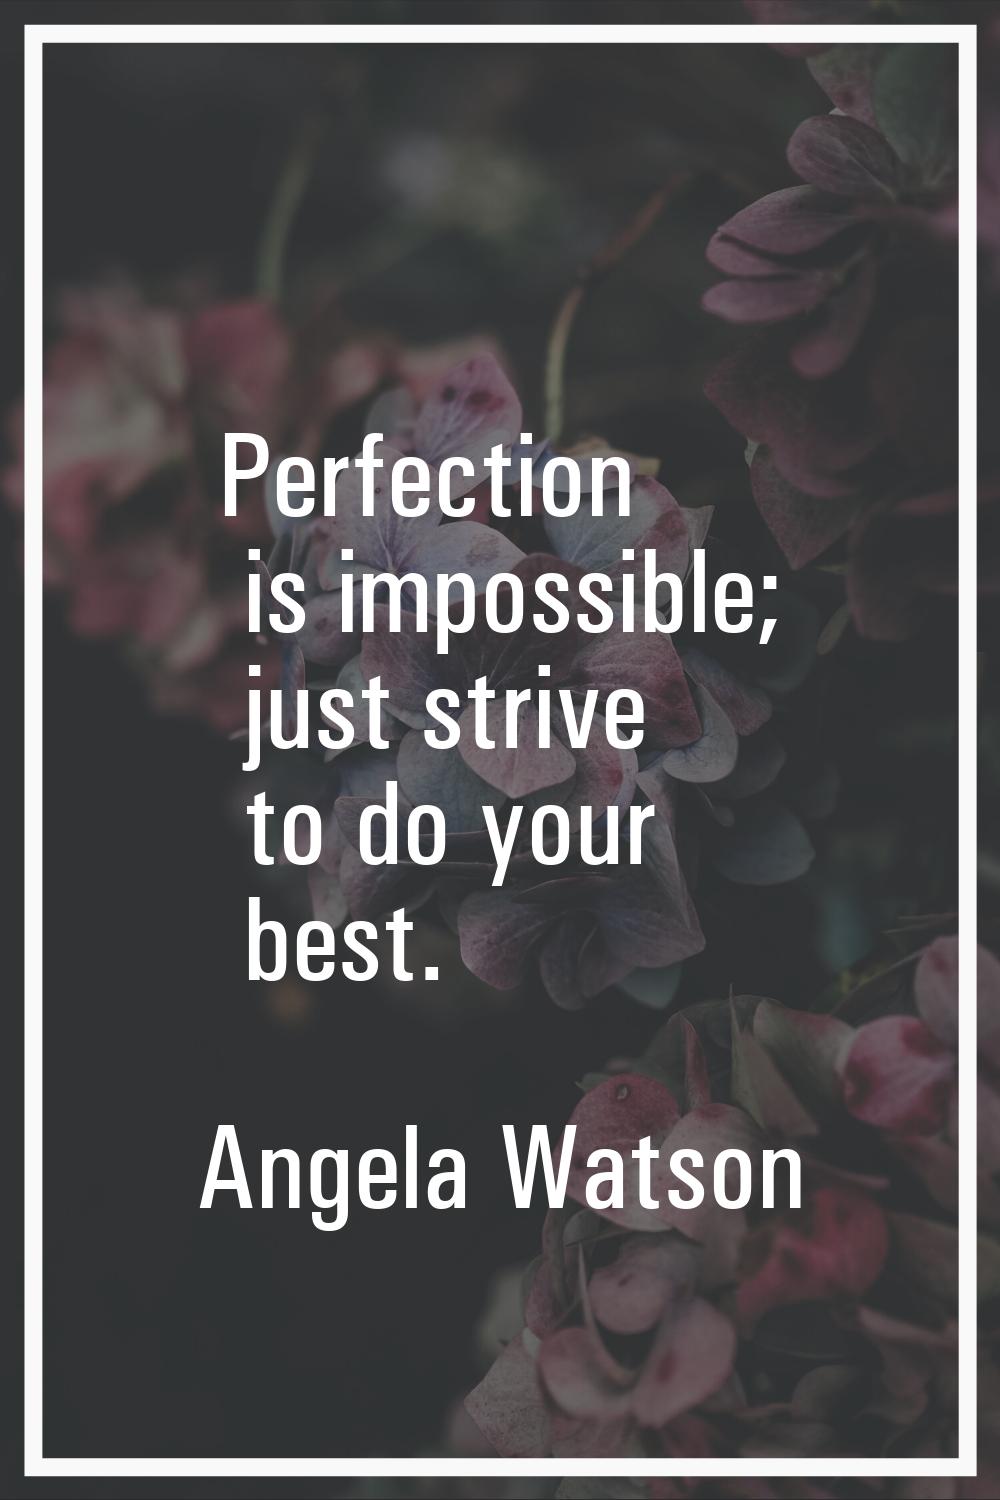 Perfection is impossible; just strive to do your best.